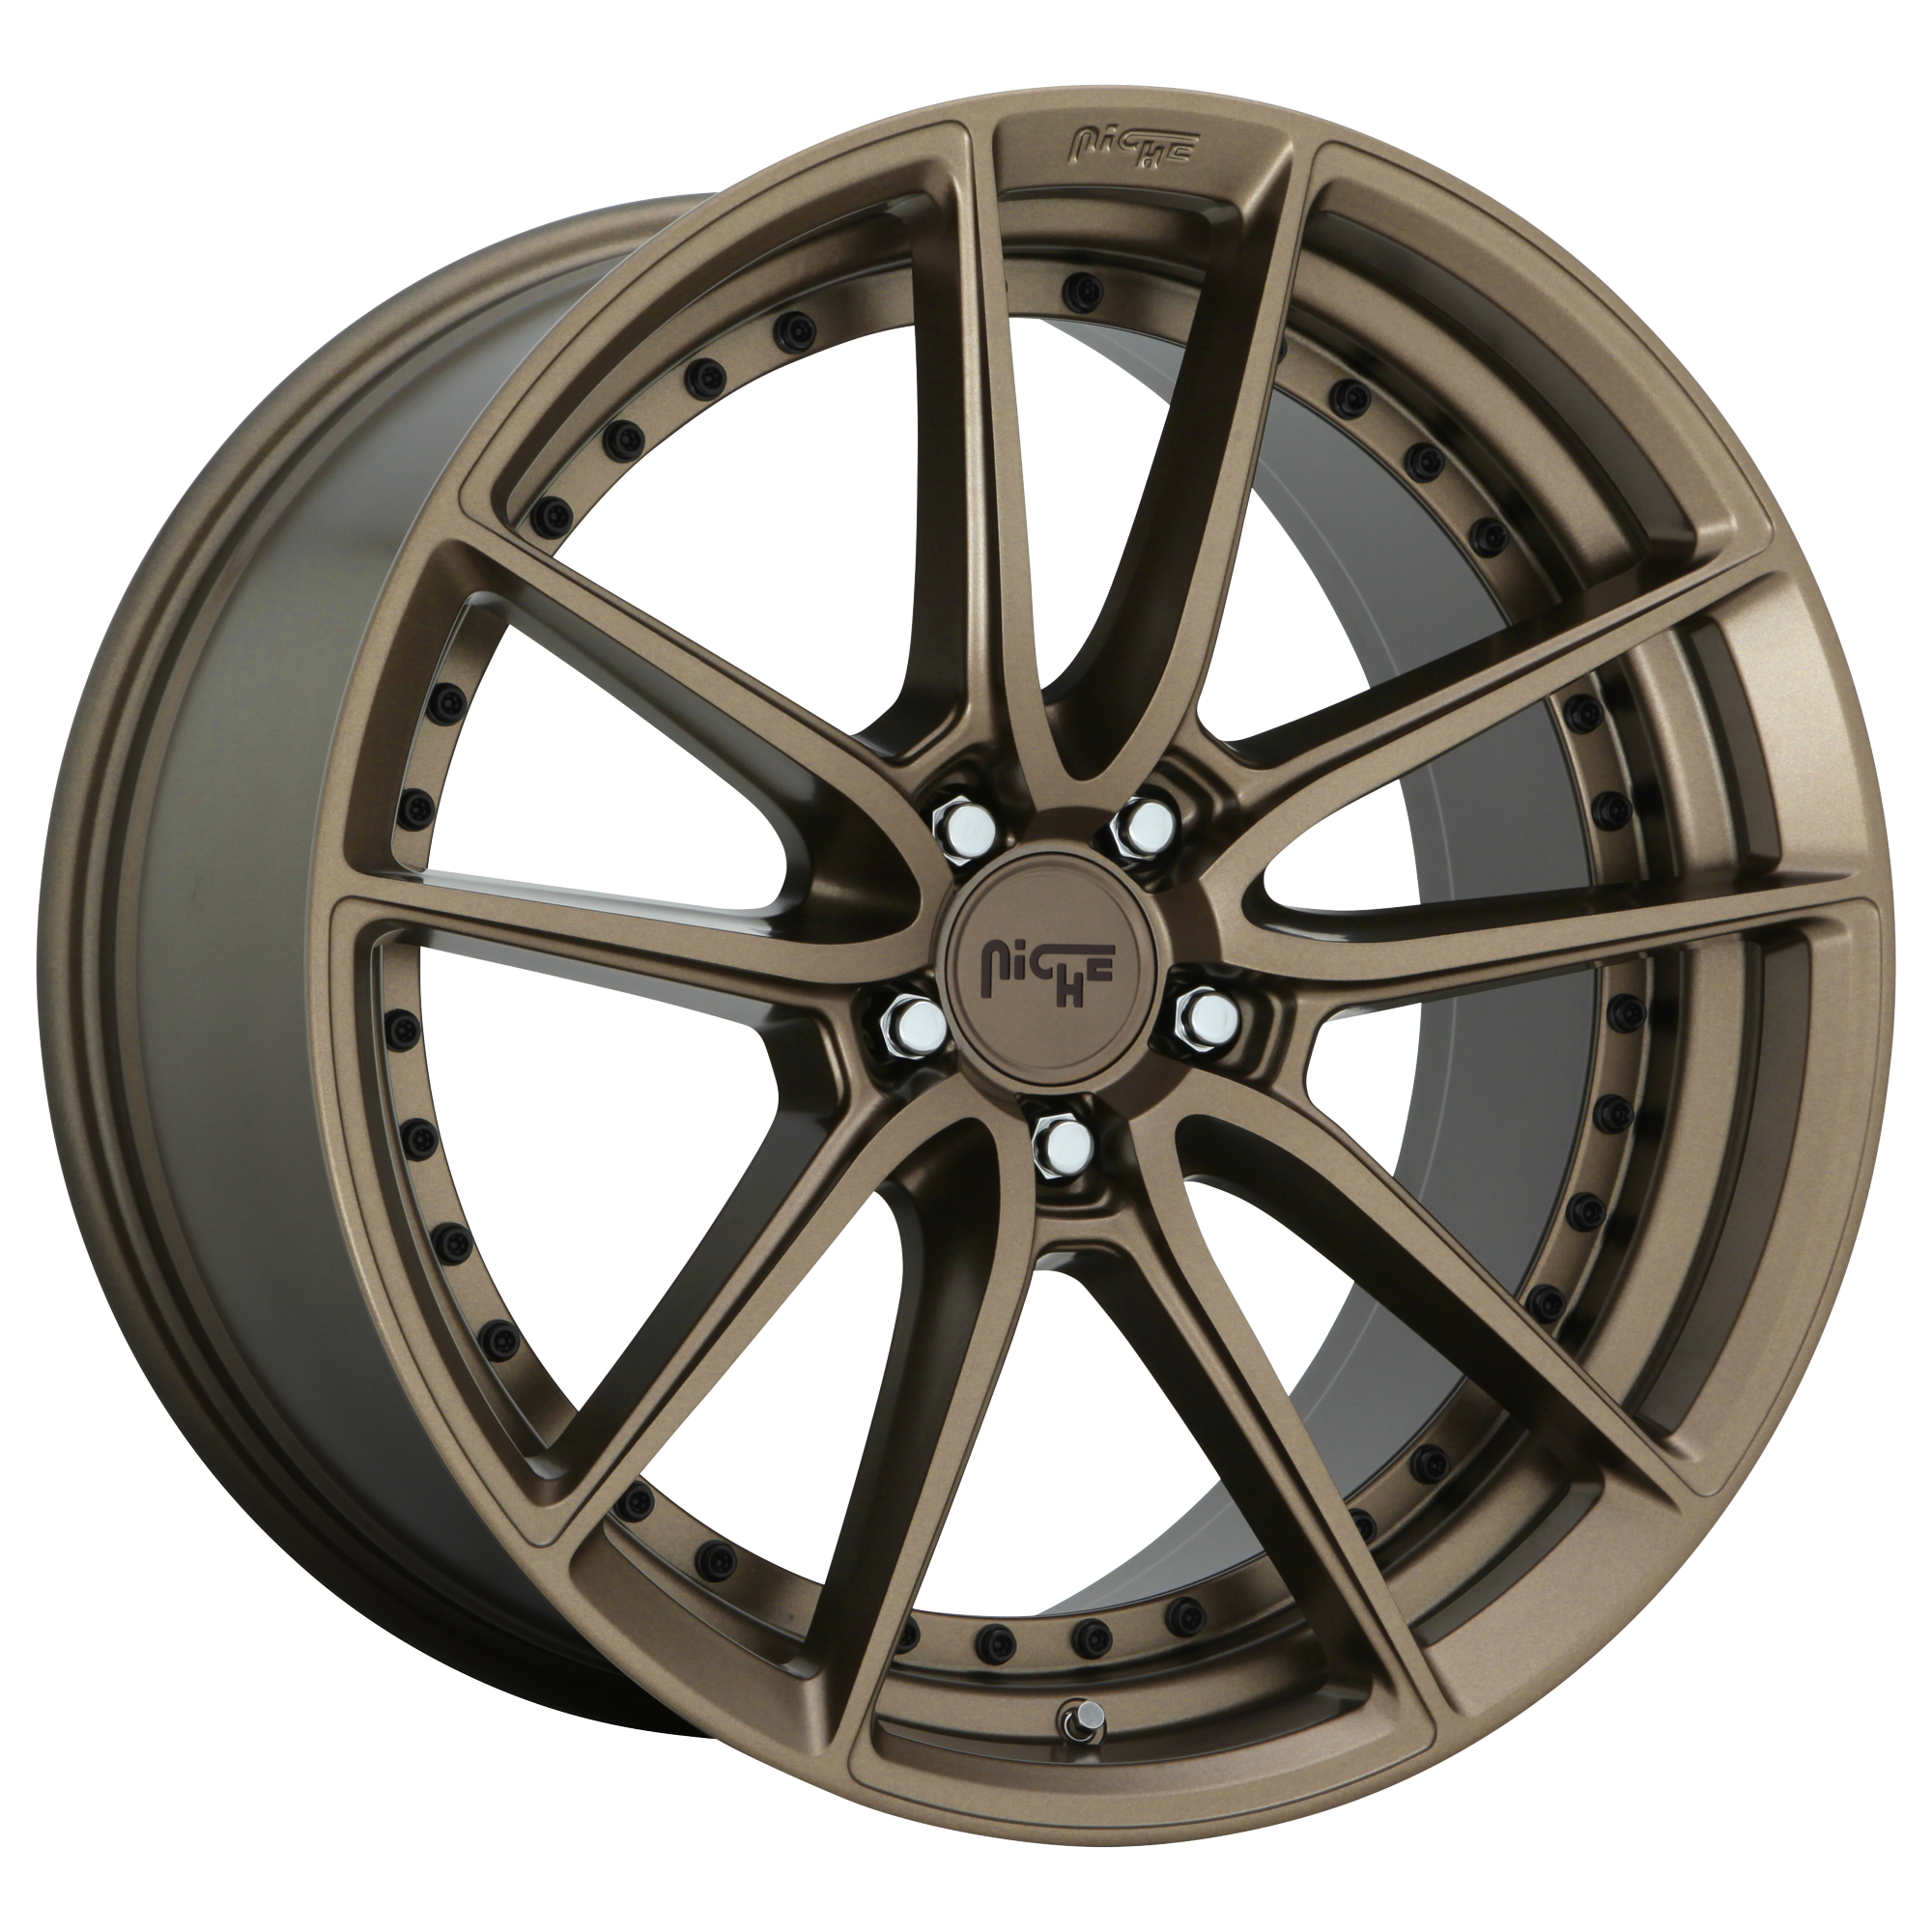 DFS 18x8 5x112.00 MATTE BRONZE (42 mm) - Tires and Engine Performance